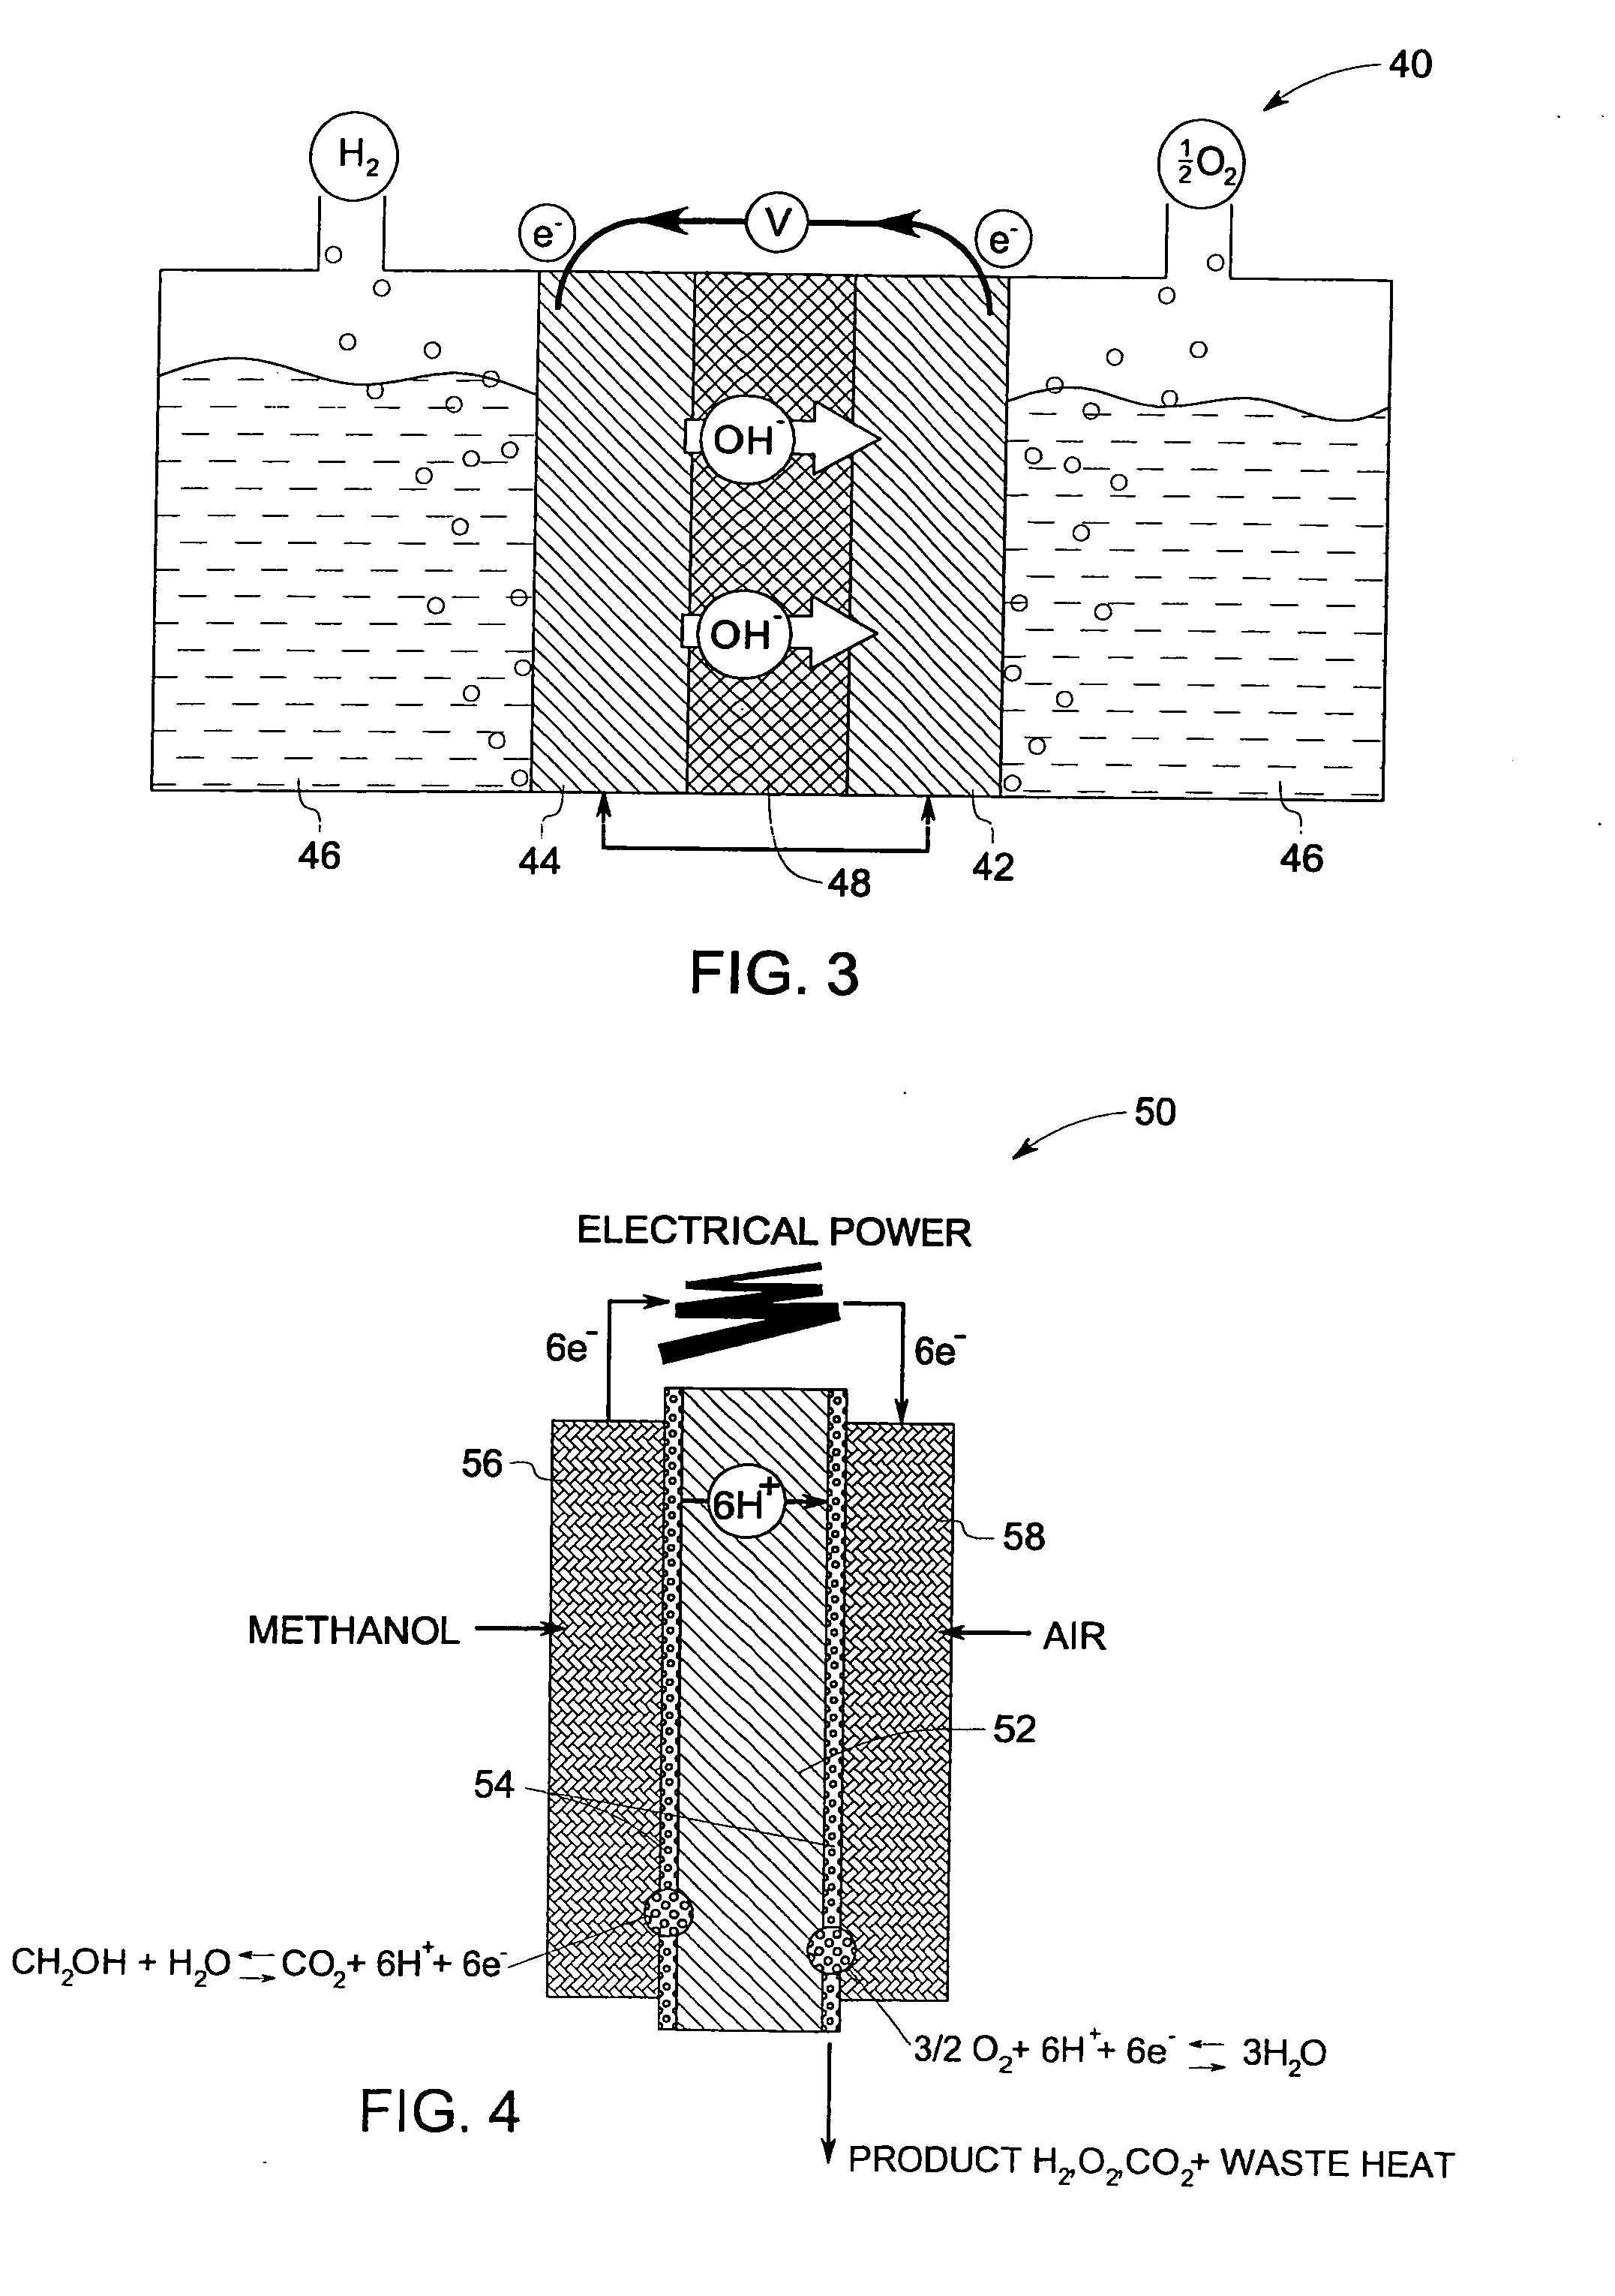 Method of forming a porous nickel coating, and related articles and compositions